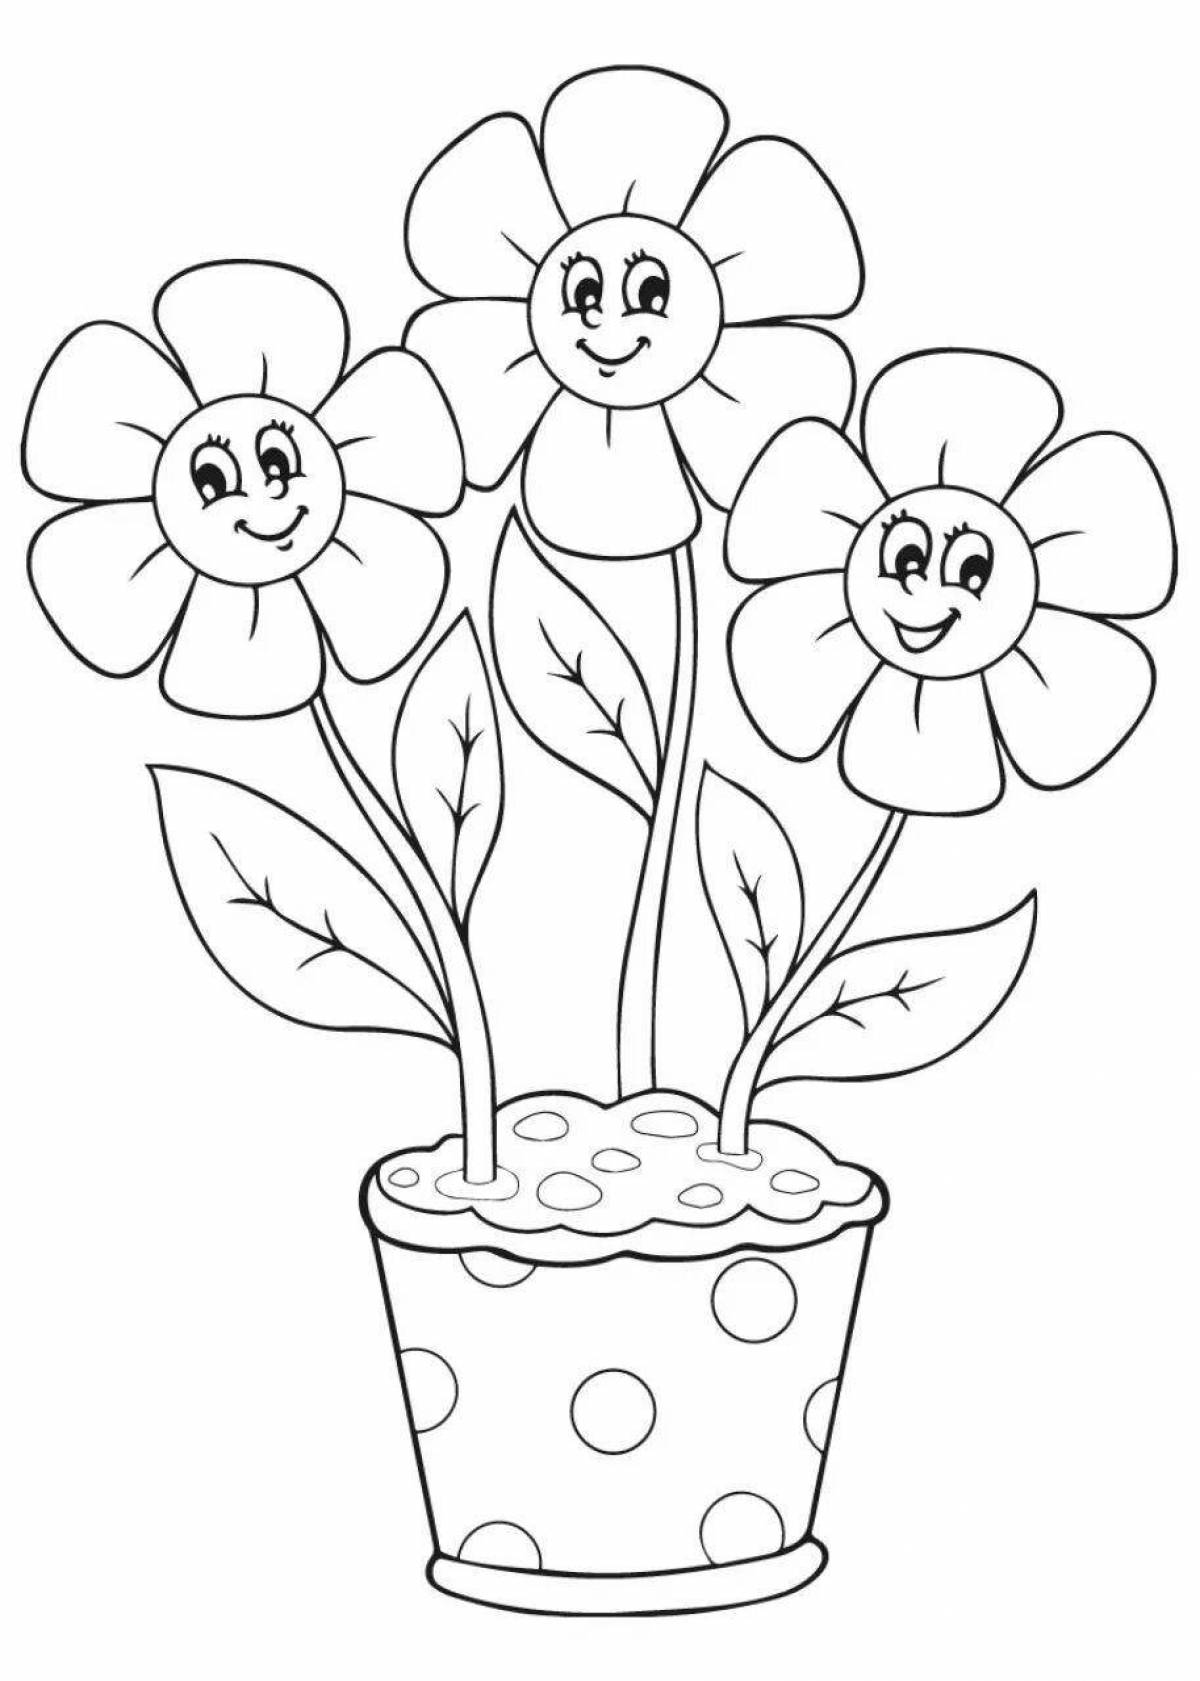 Luminous potted flower for 3-4 year olds